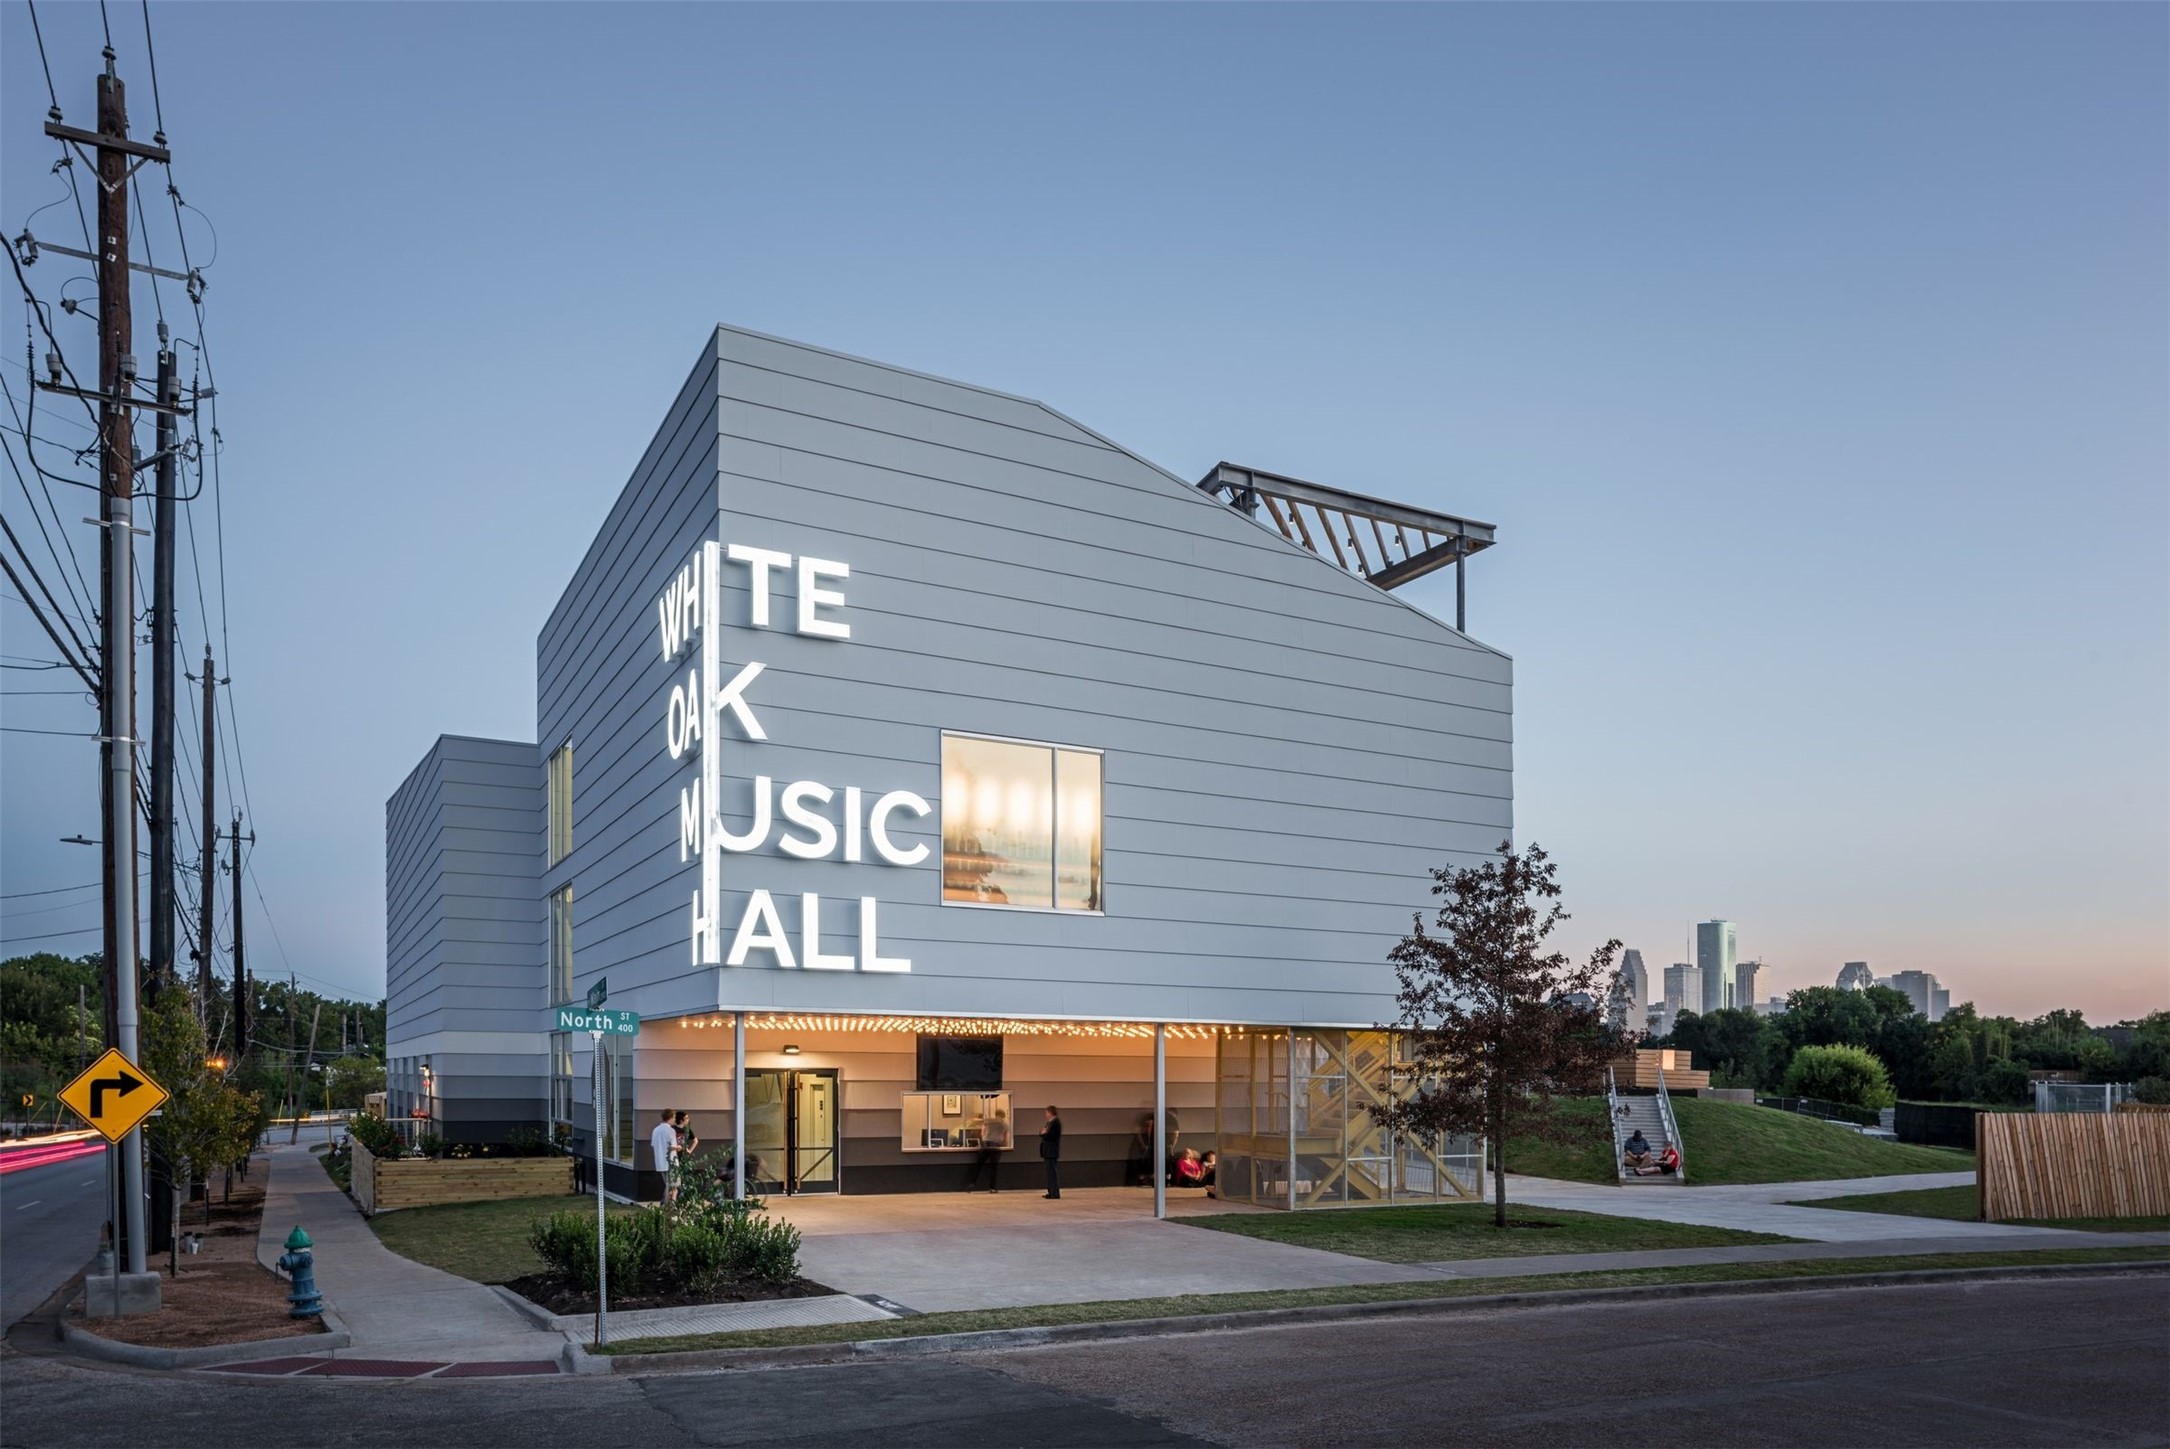 White Oak Music Hall is a live music venue in the Heights. Its inviting and vibrant atmosphere combined with the state-of-the-art amphitheater and 2 indoor spaces make it a music lover's destination.